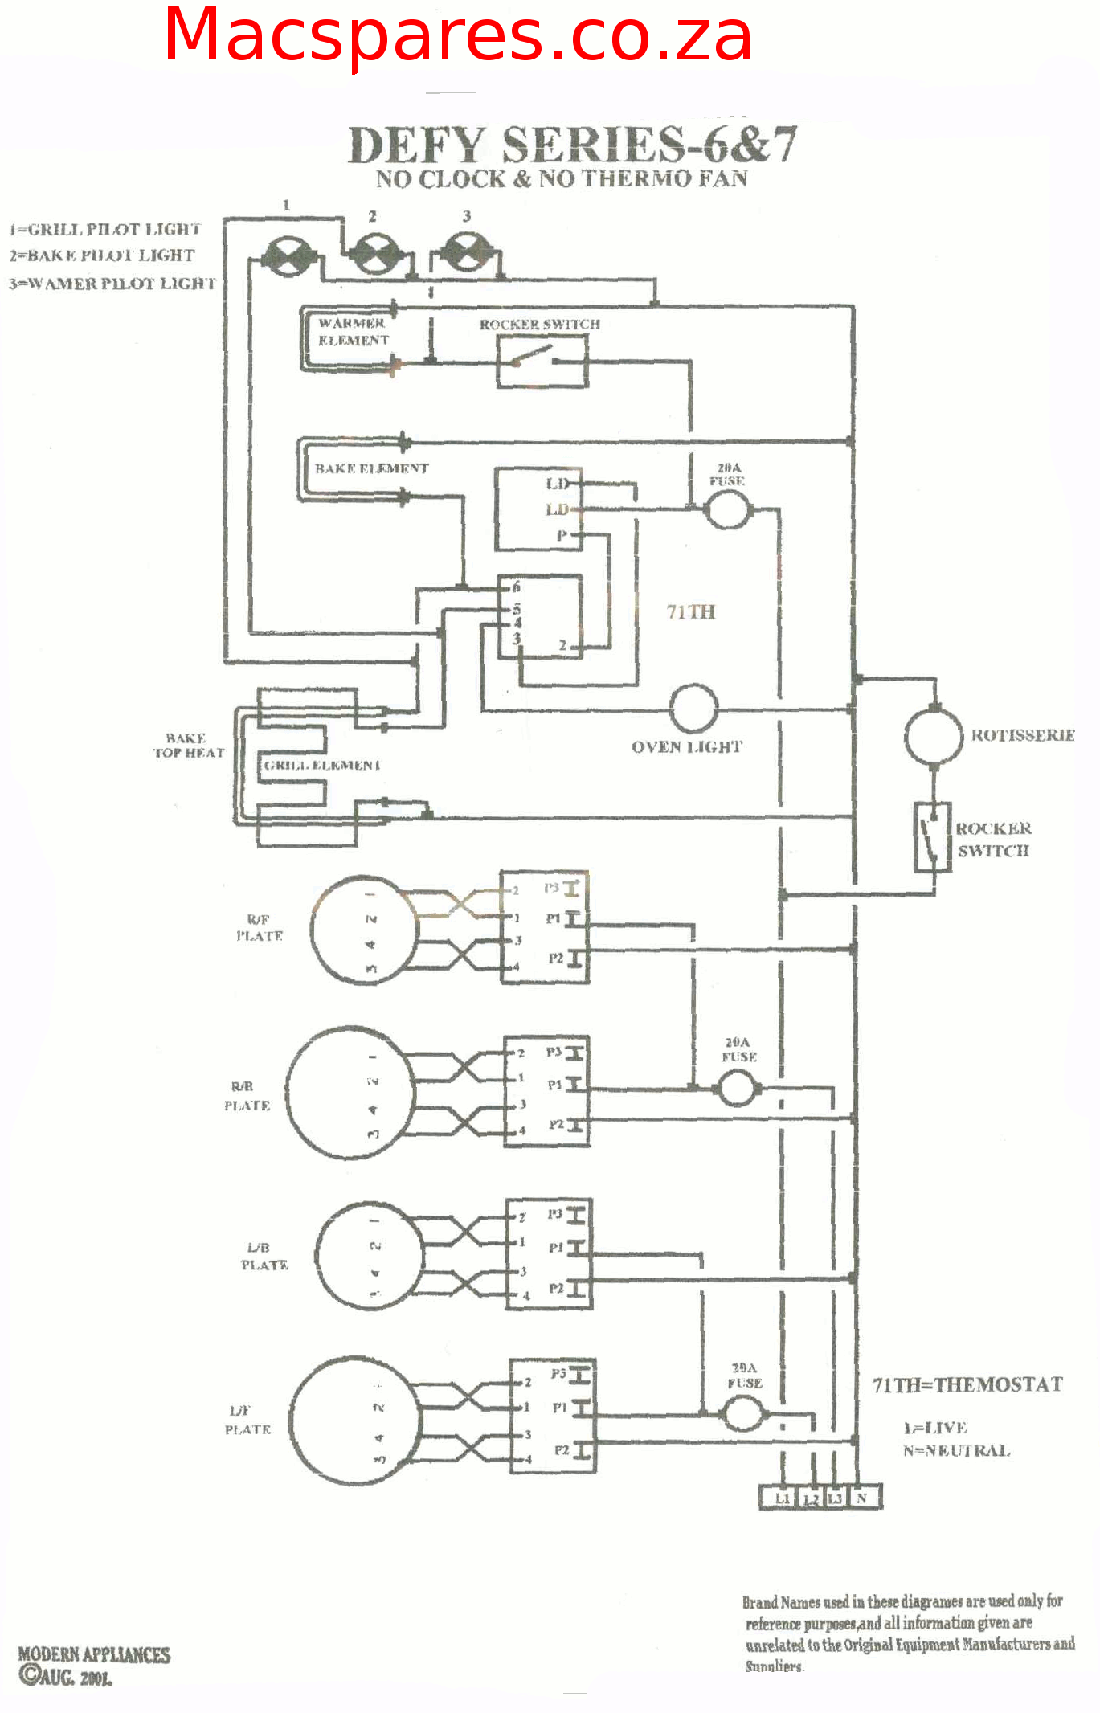 Electric Stove Stove Switch Wiring Diagrams from macspares.co.za